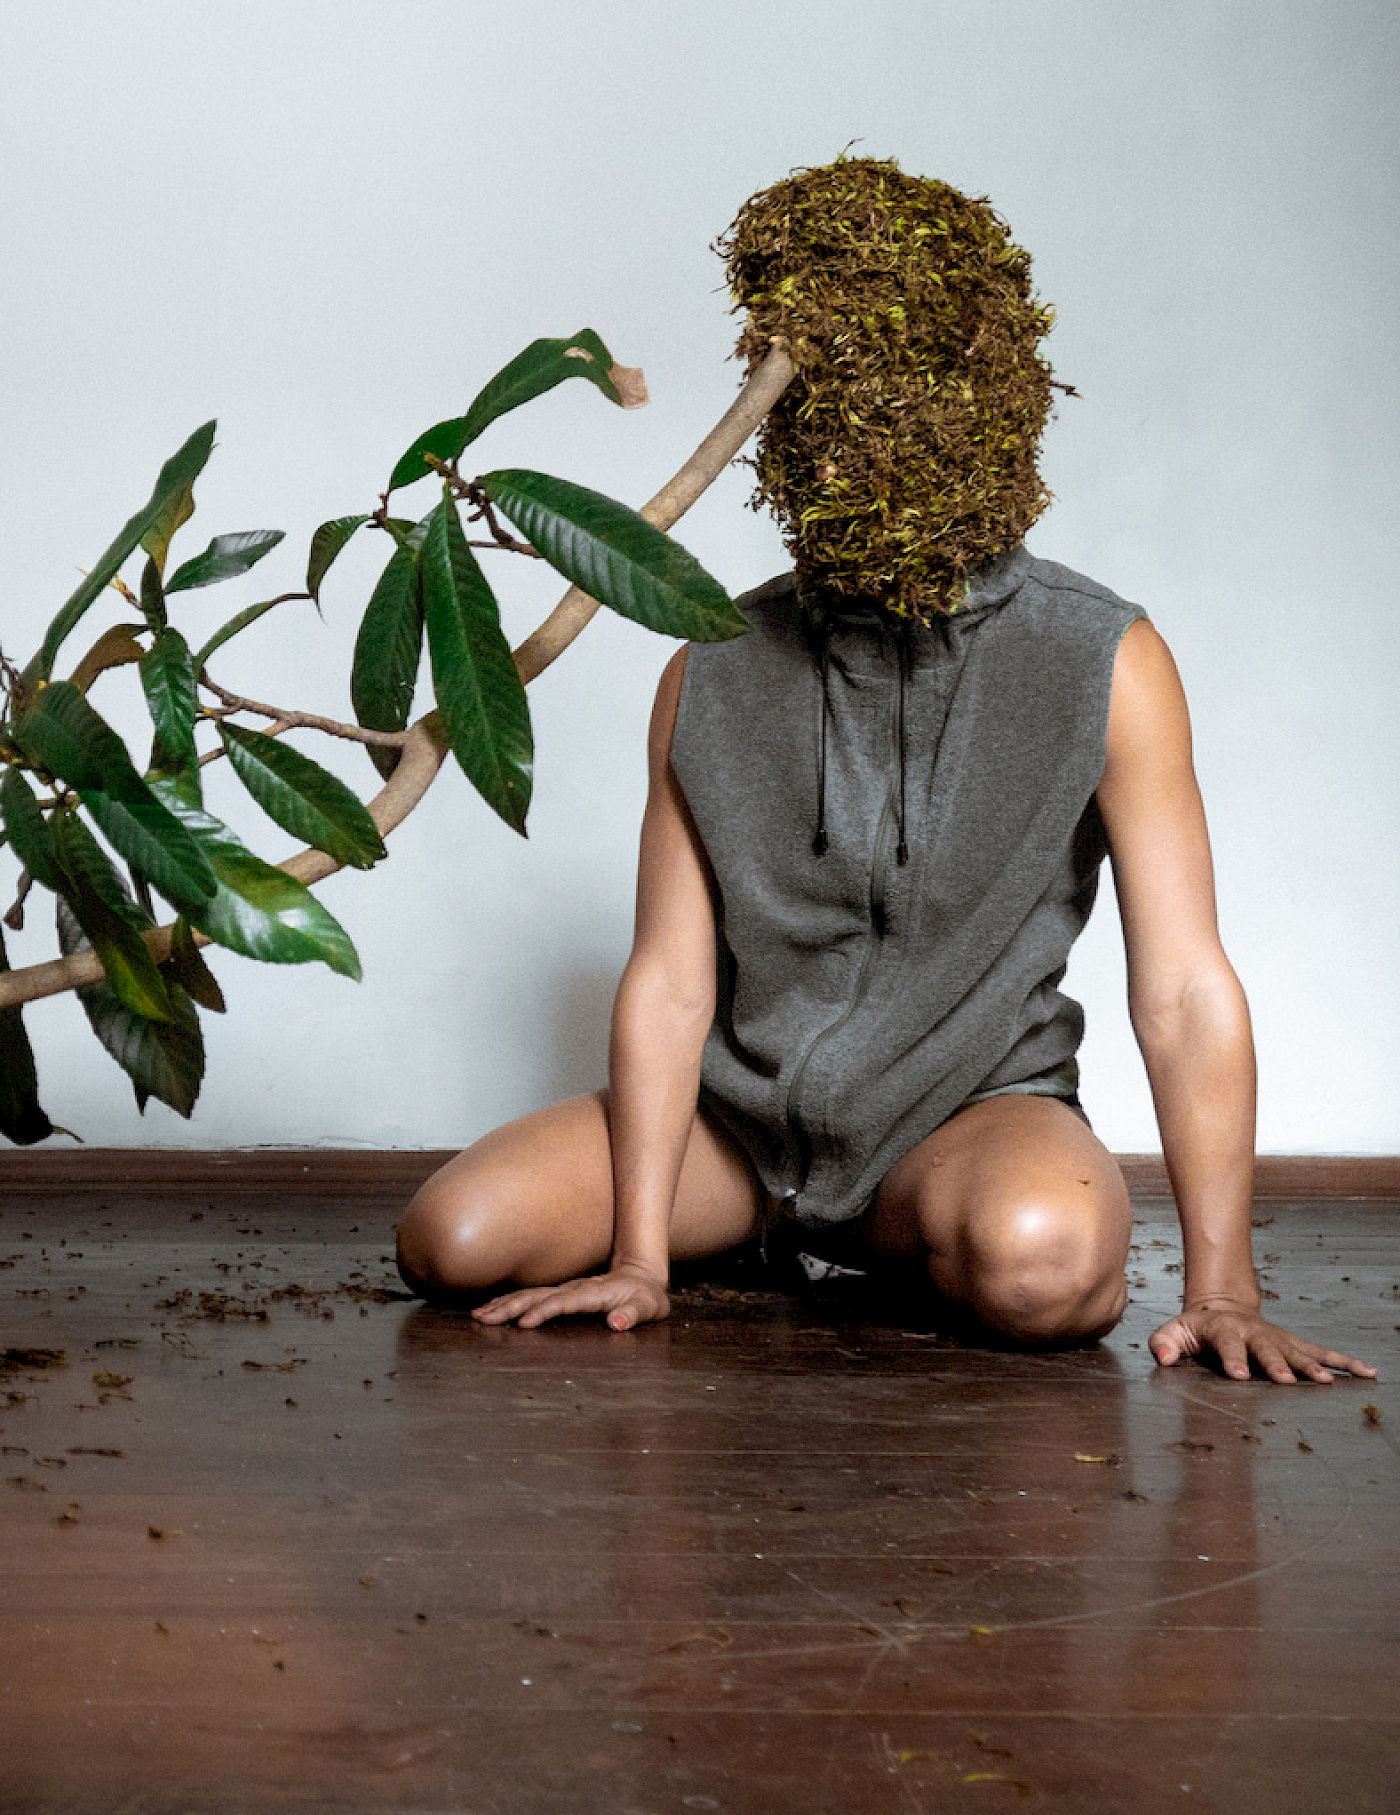 Kneeling person has a bonnet of moss pulled over the head, a branch with leaves seems to be growing out of the head.